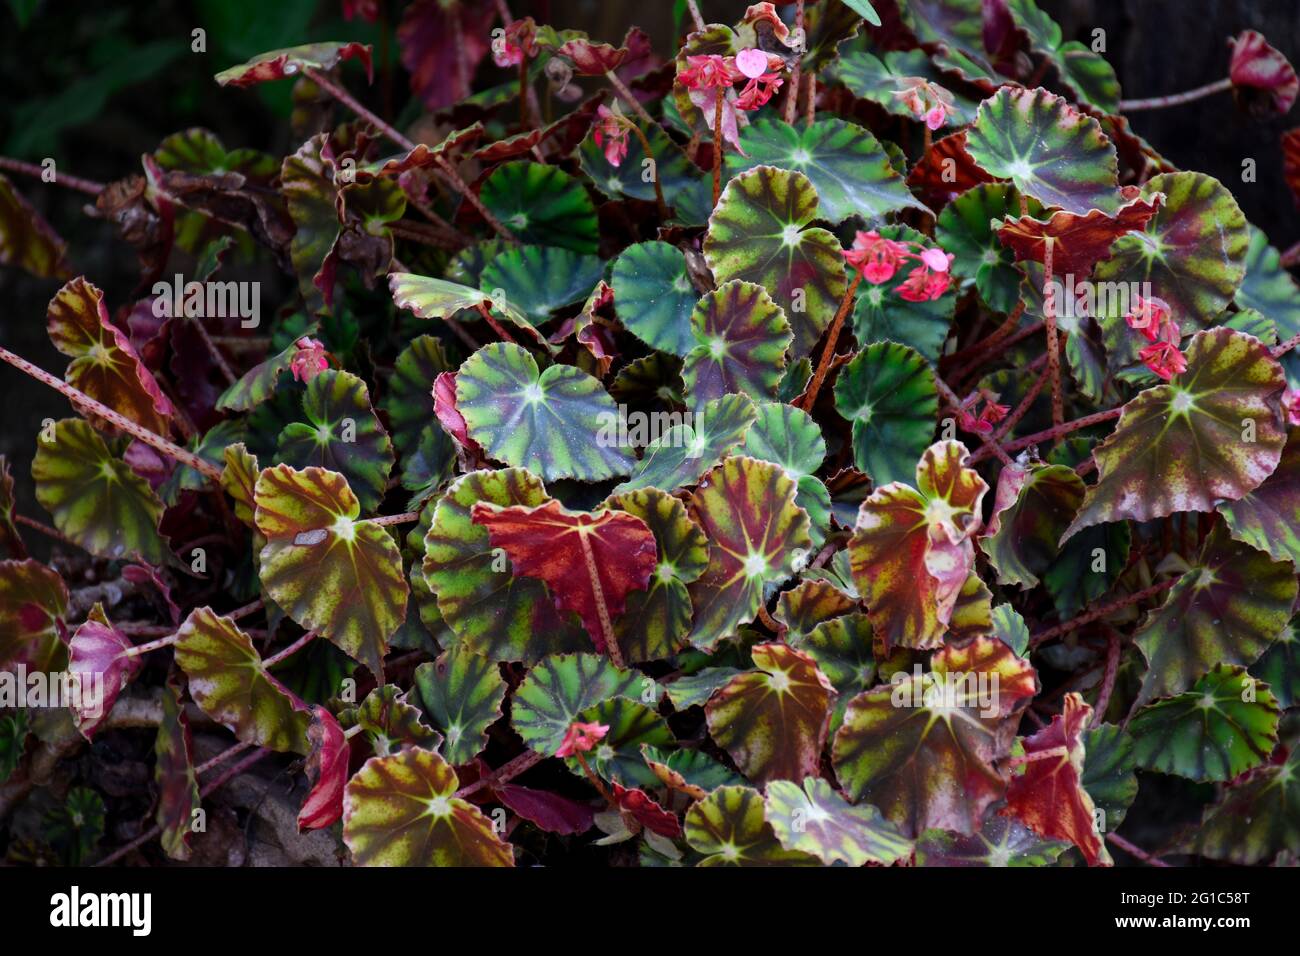 Begonia rex leaves, a mix of green, pink or burgundy, also include metallic shades of grayish silver. Stock Photo